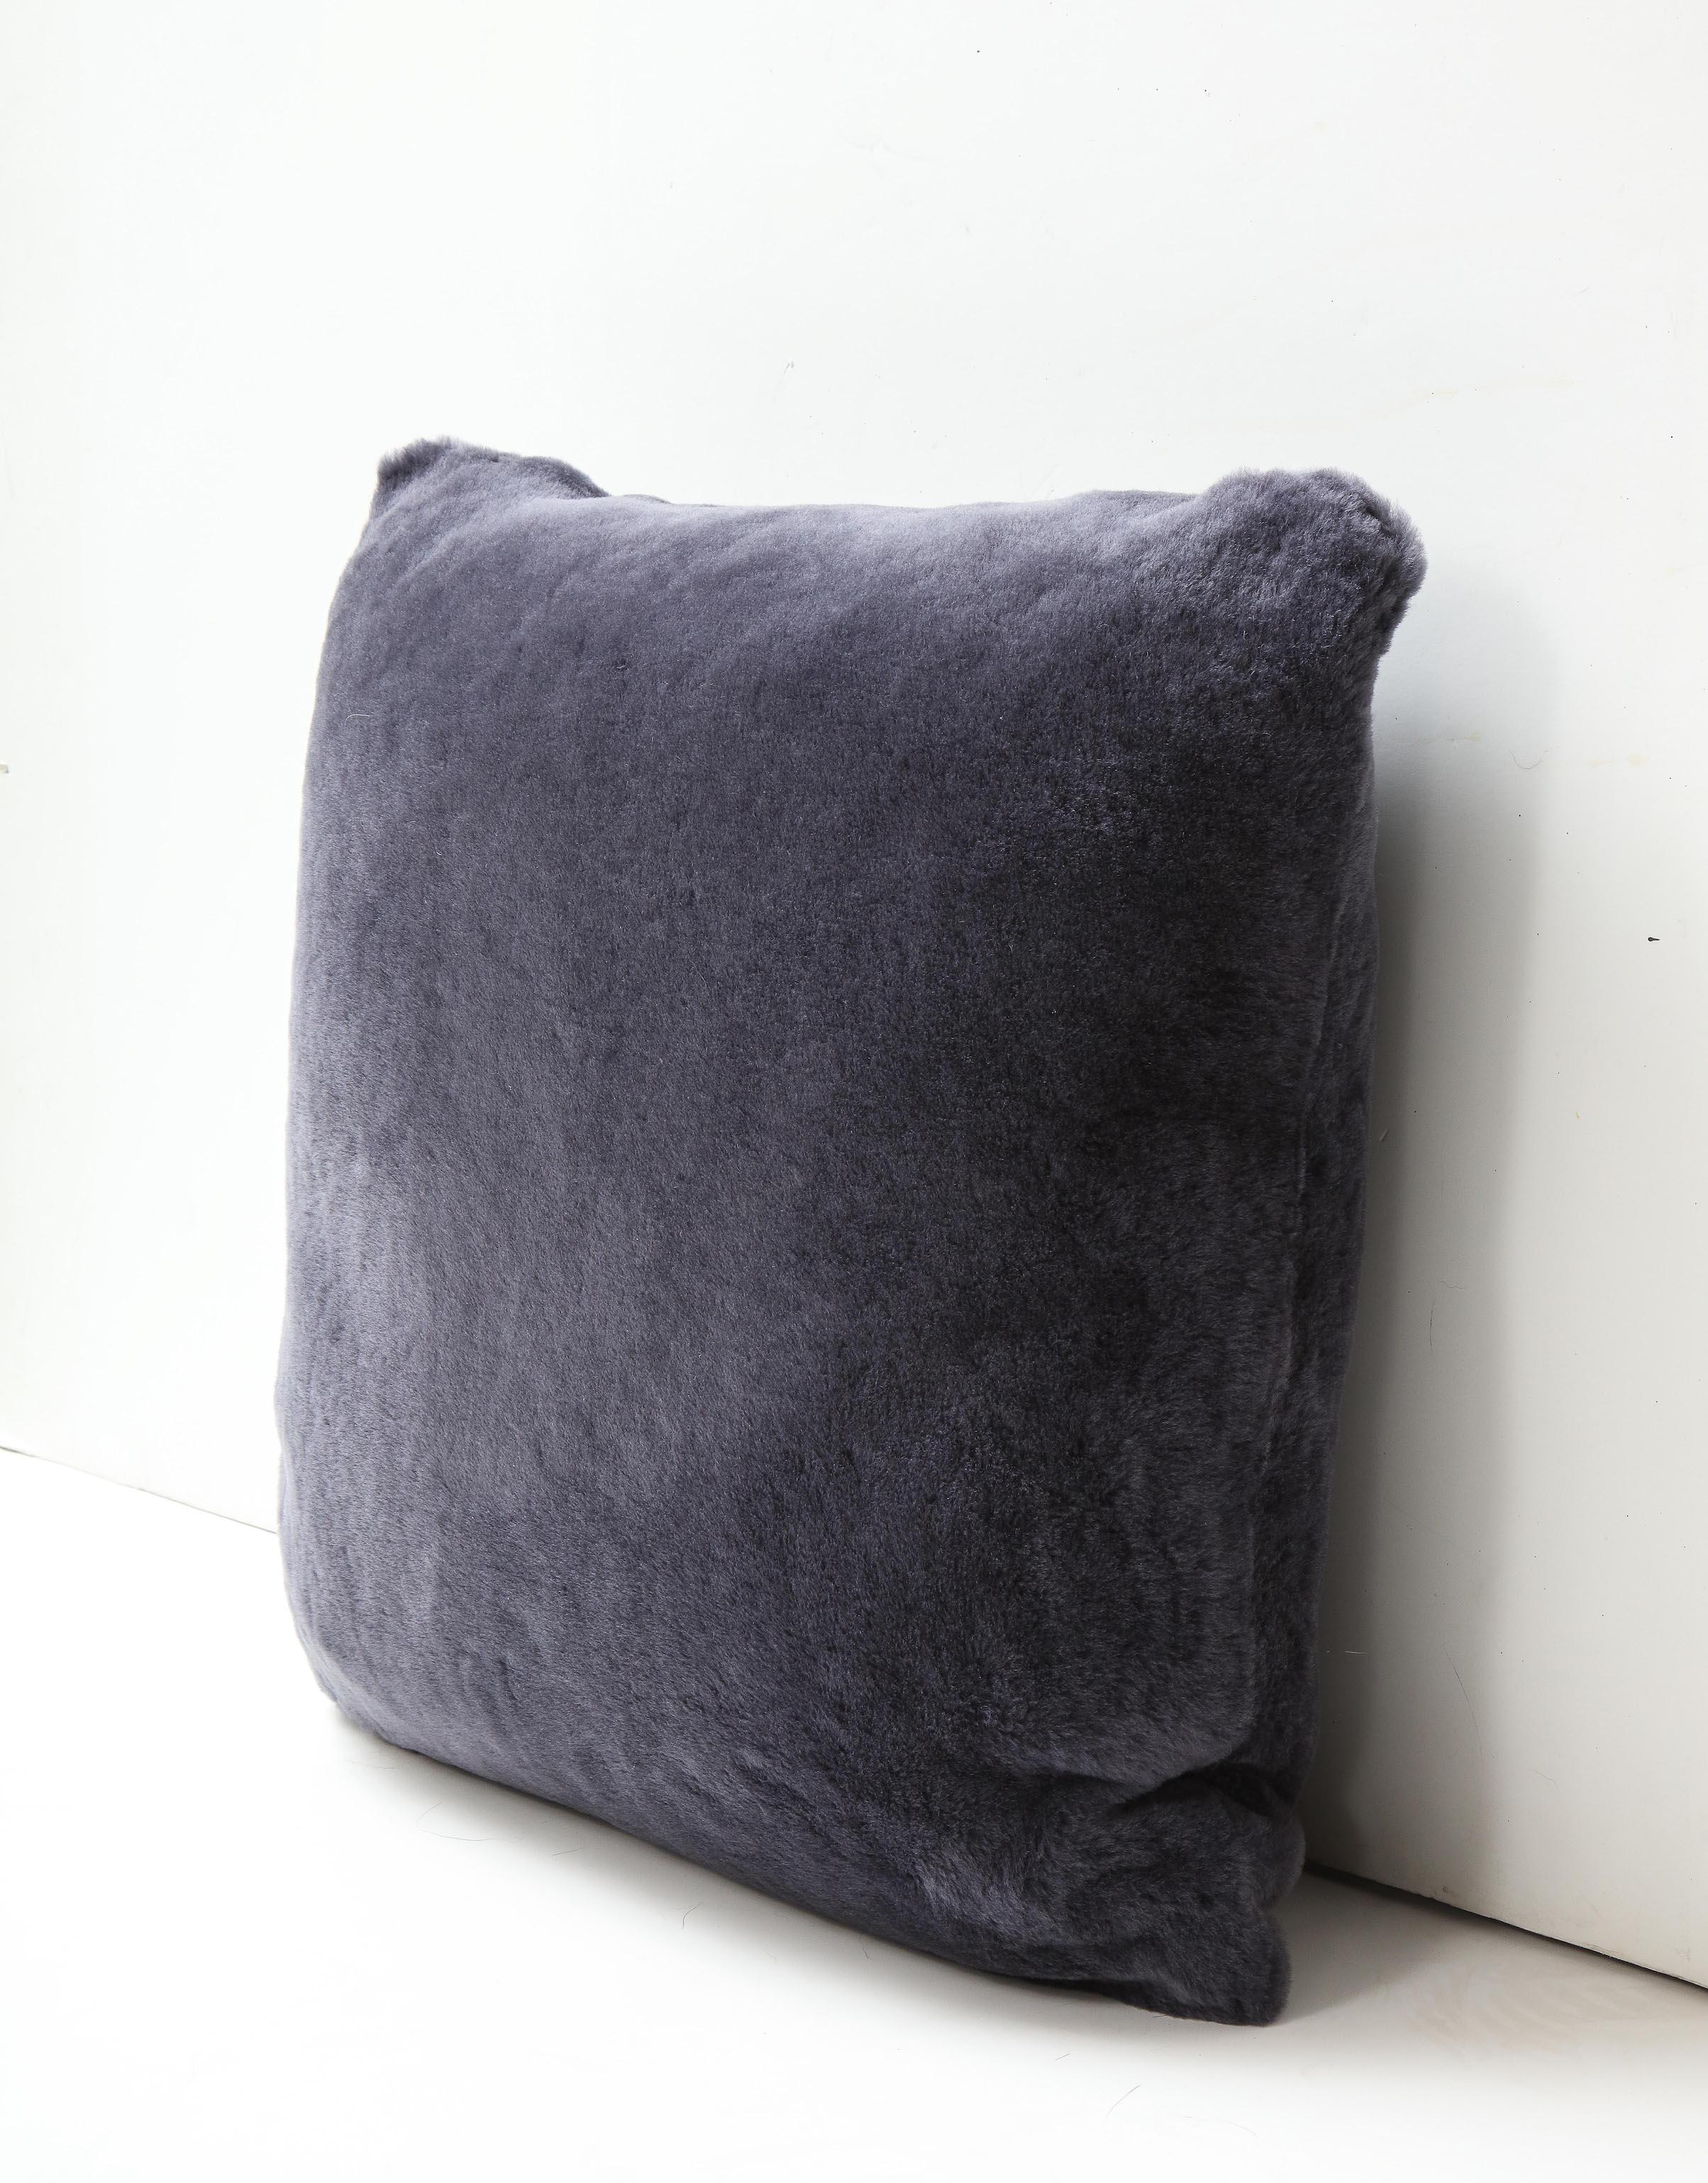 Beautiful double sided short hair Merino shearling pillow in purple grey color. Very soft and luxurious in touch with a tone of modern appeal. It is made of genuine shearing fur with a zipper enclosure in a matching color, filled with down and